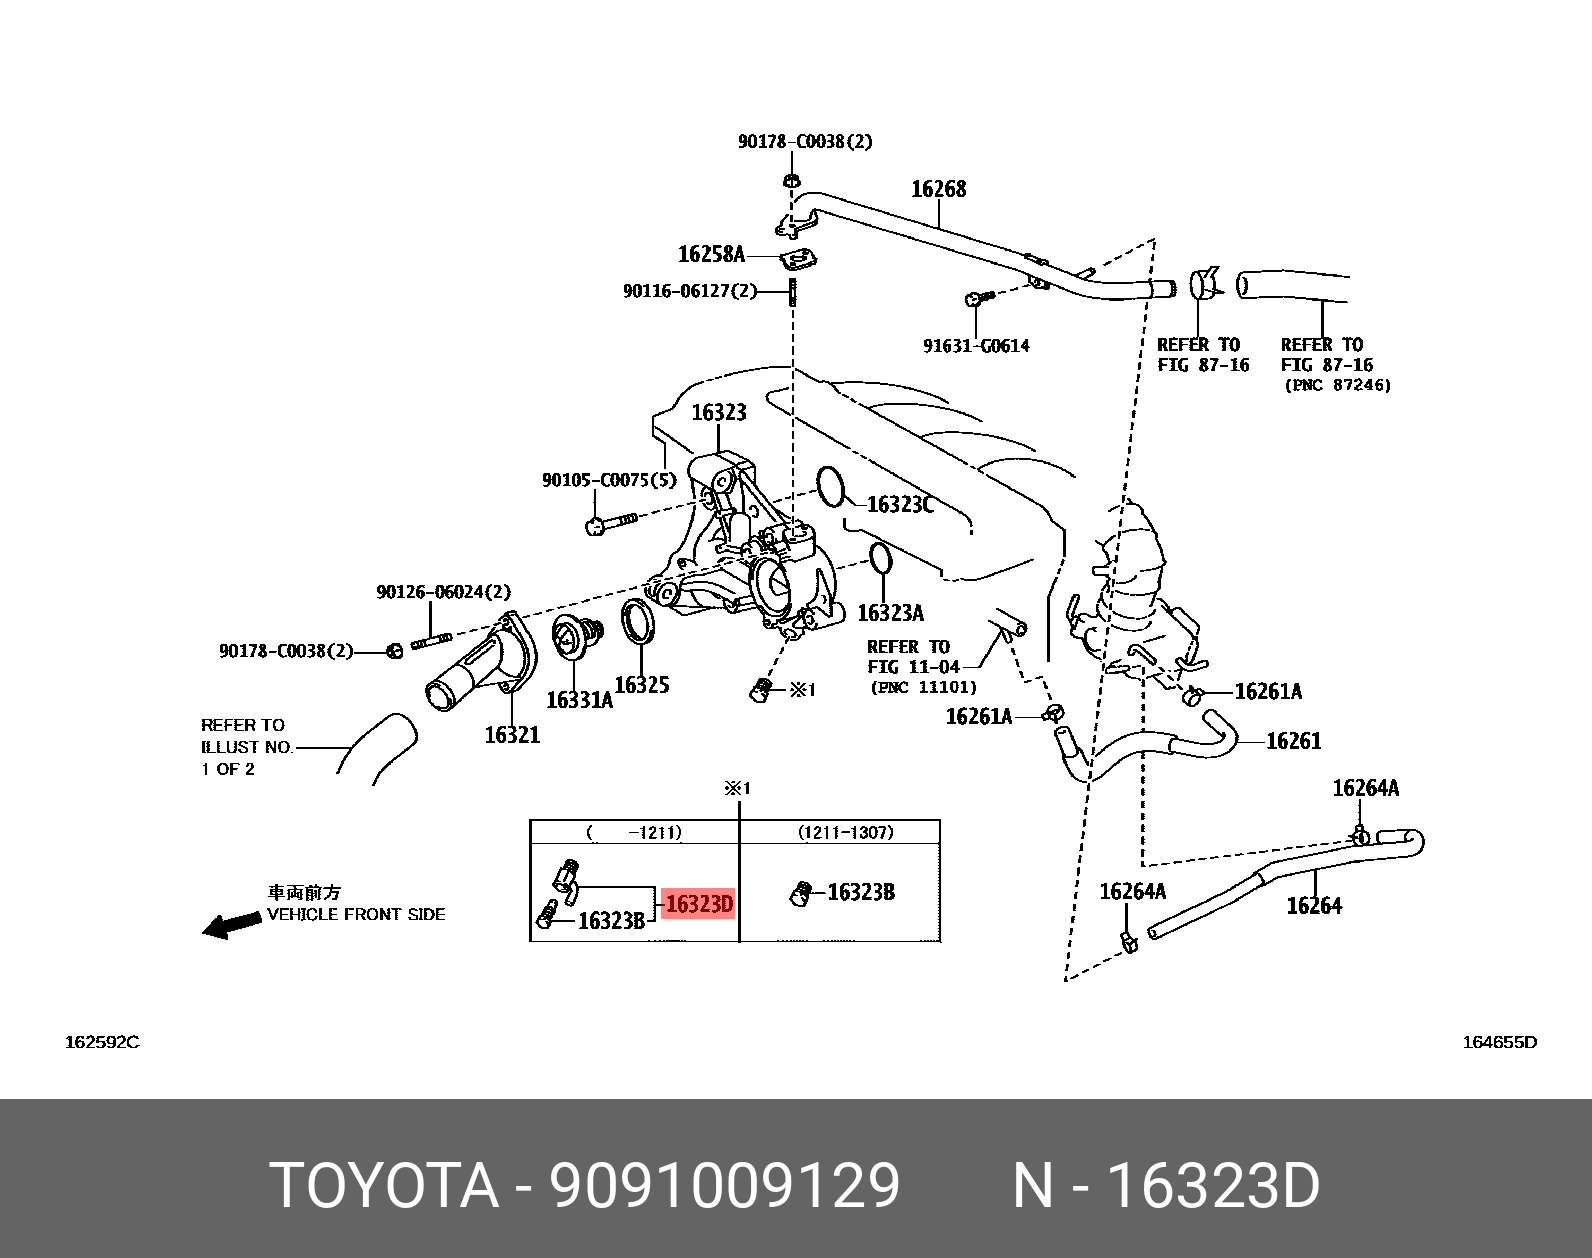 PRIUS (PLUG-IN) LEASE 200912 - 201010, COCK SUB-ASSY, WATER DRAIN(FOR CYLINDER BLOCK)